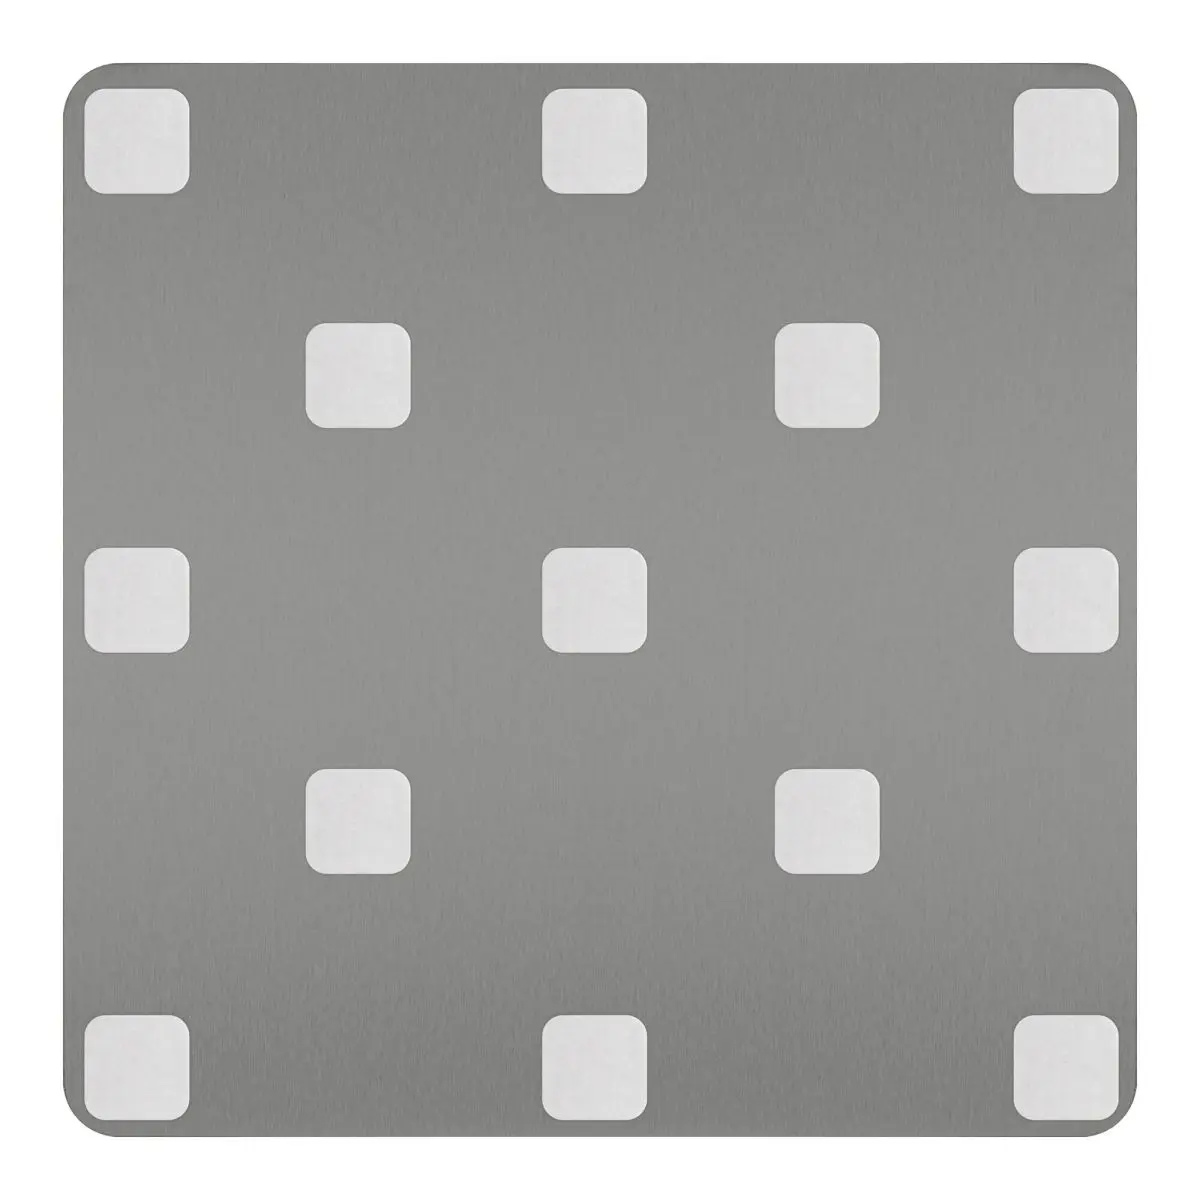 Magnetboard flexiMAGS - 40 x 40 cm,silber